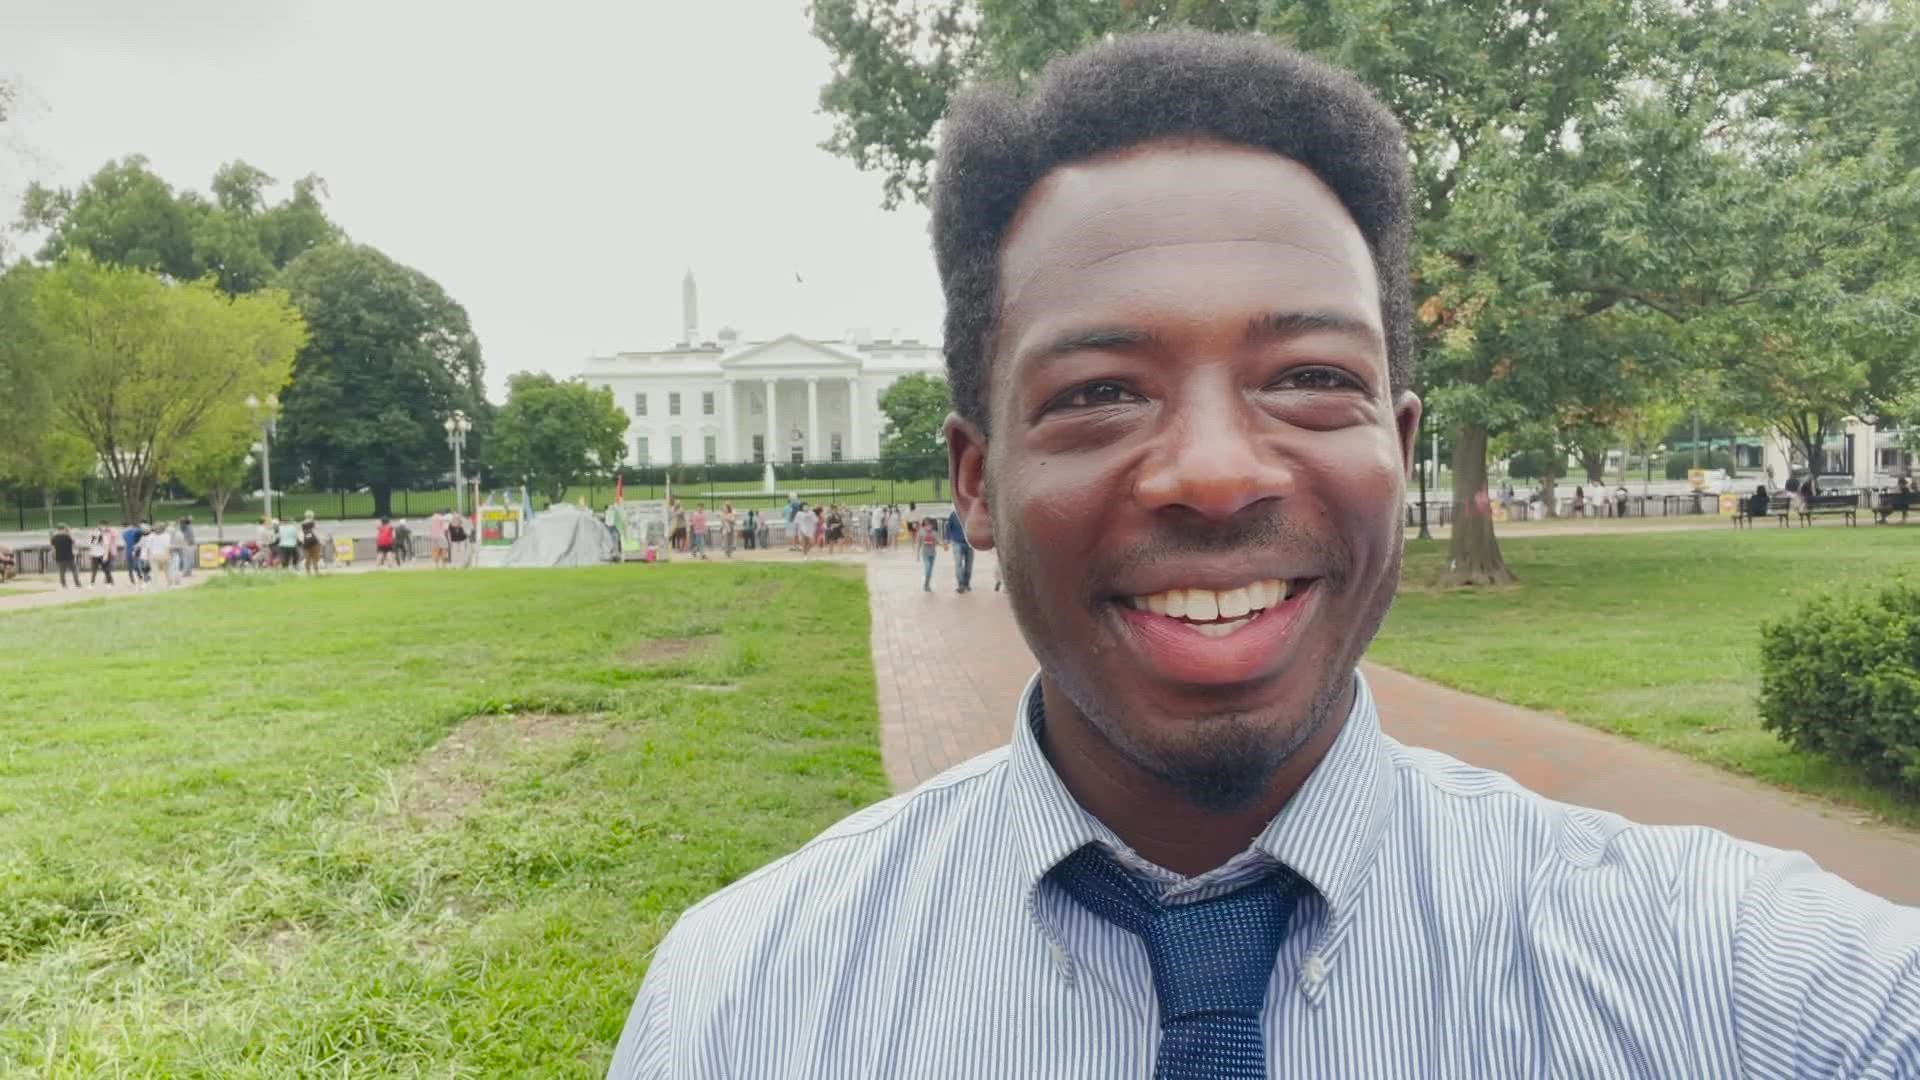 Kwabi Amoah-Forson drove across the country, handing out books to children along the way, in hopes to talk with President Biden about bringing the country together.